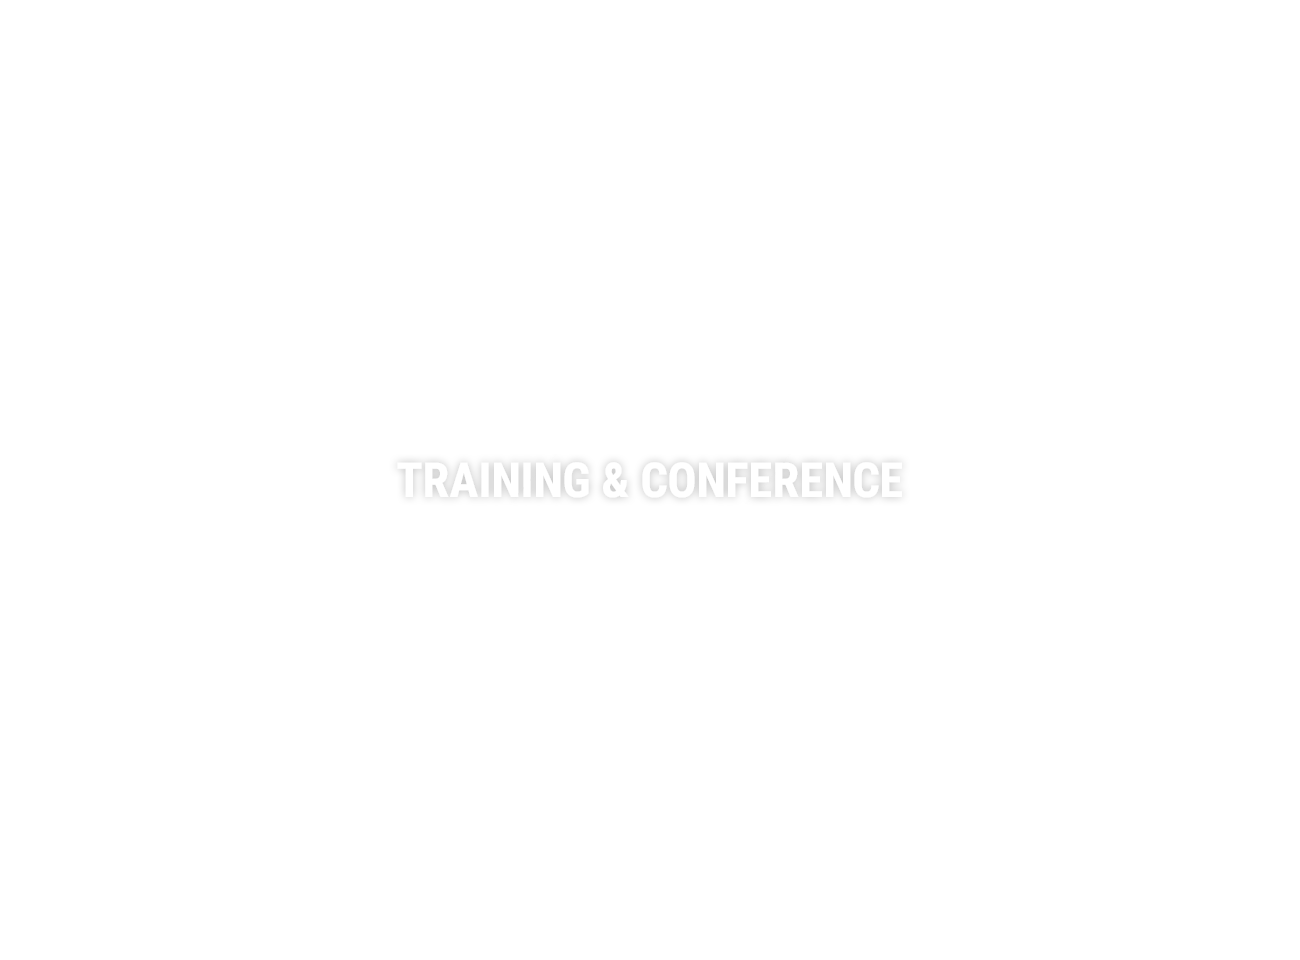 TRANING & CONFERENCE